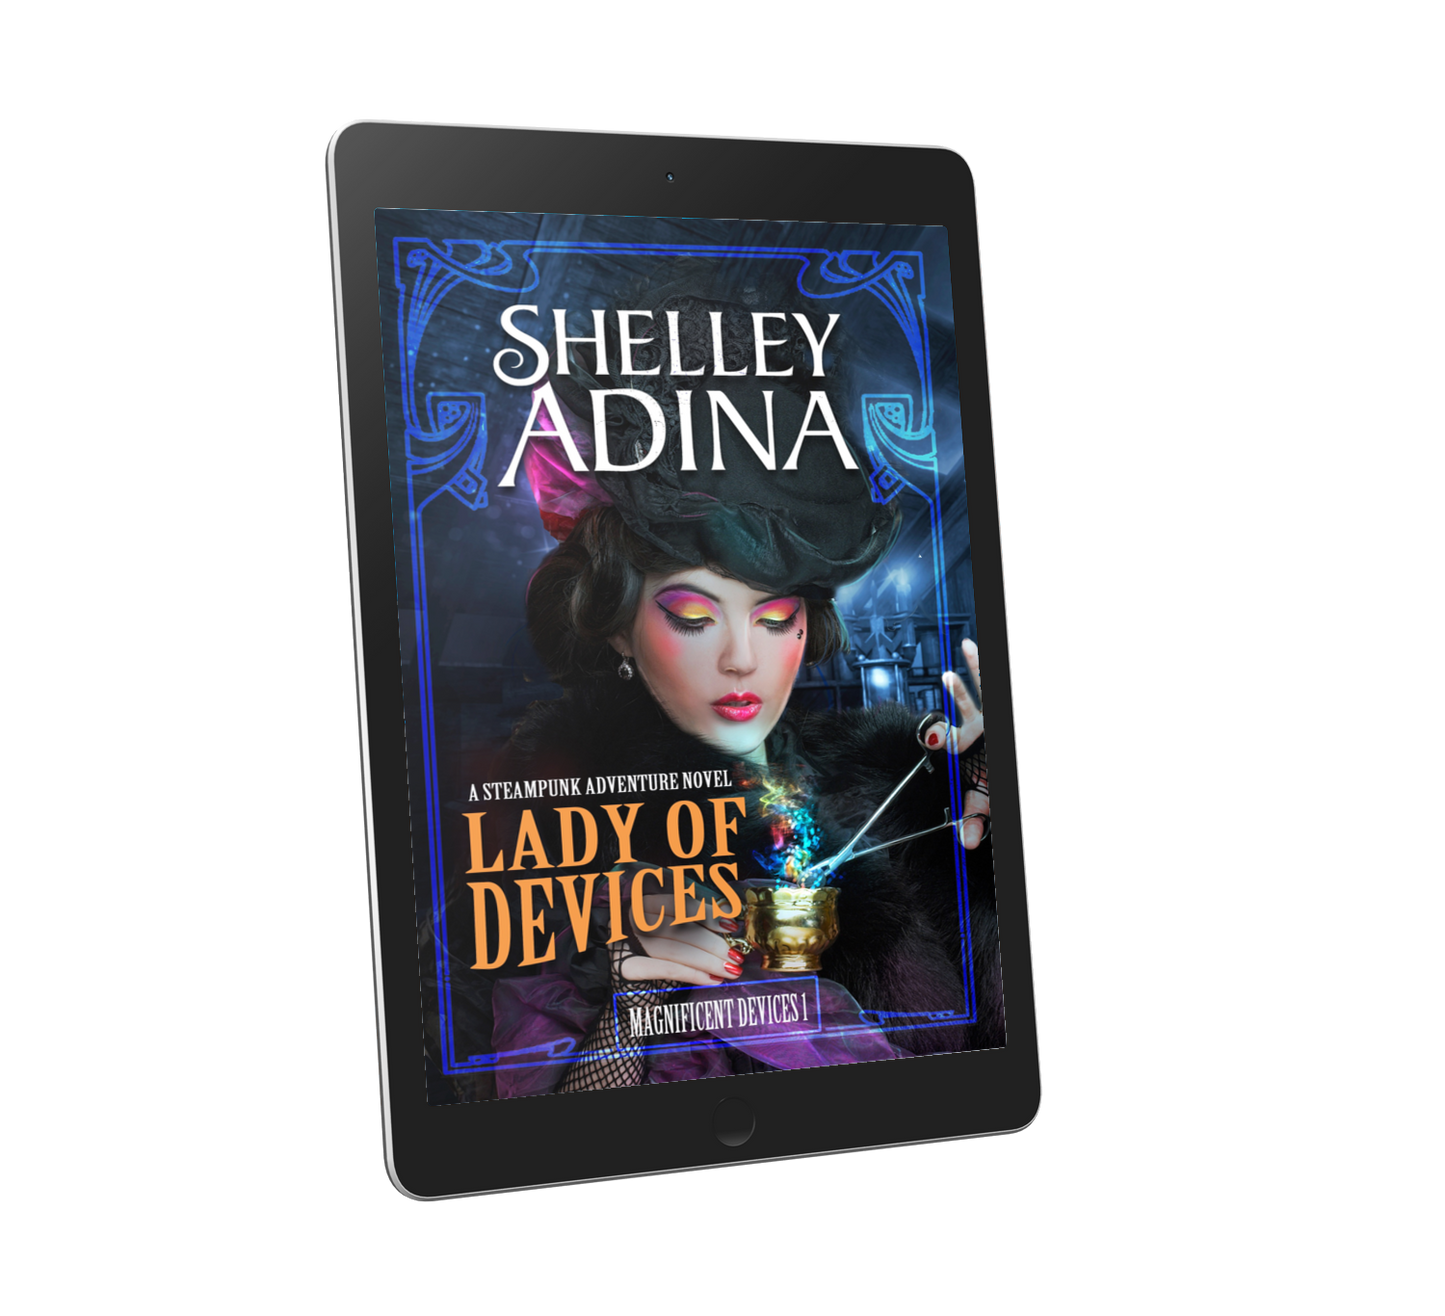 Lady of Devices, a steampunk adventure novel by Shelley Adina